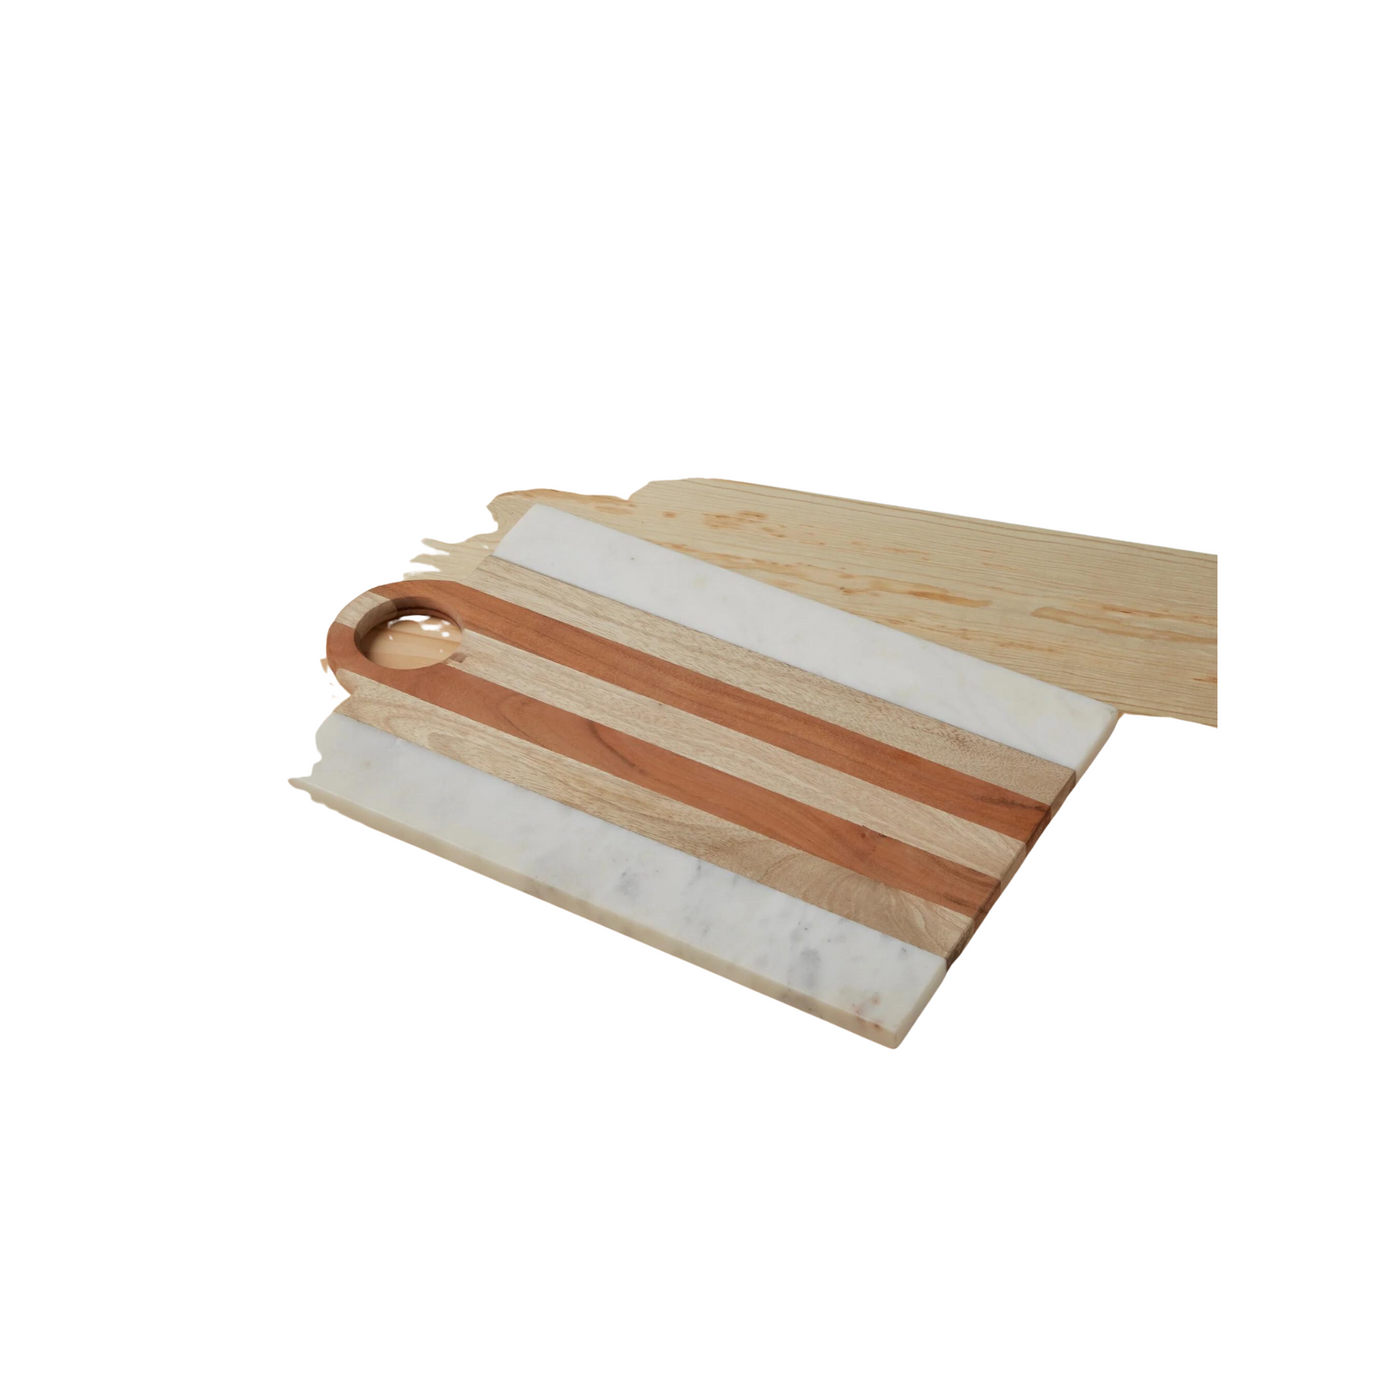 Moa Marble & Wood Rectangular Board by Be Home